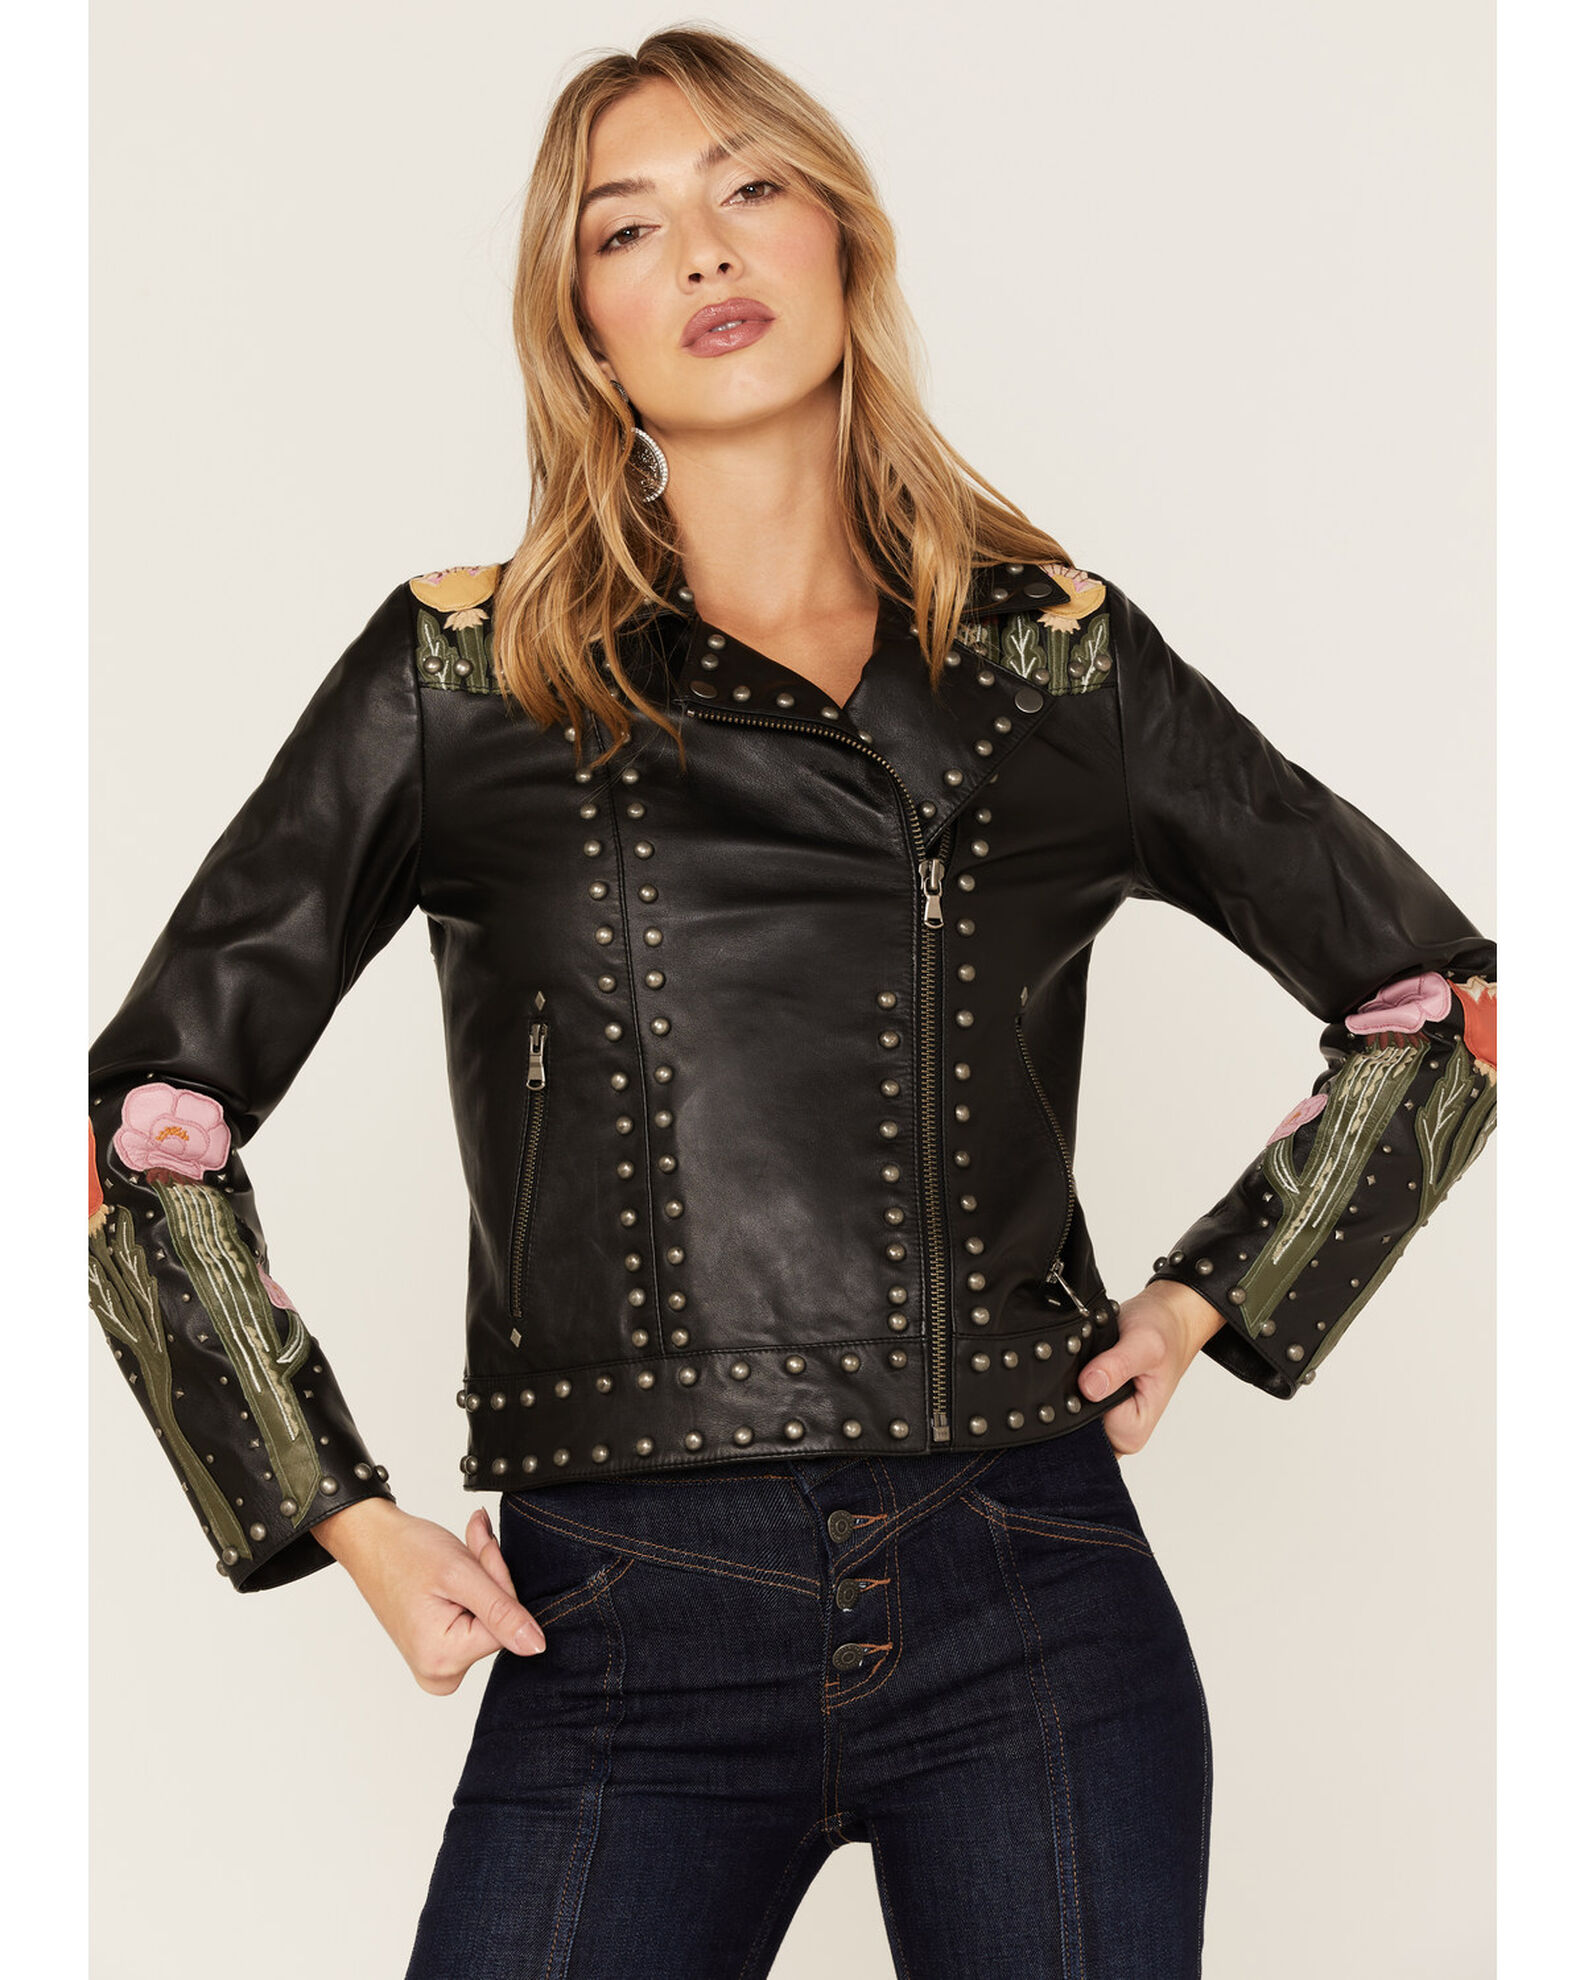 Idyllwind Women's Cactus Bloom Floral Patchwork Leather Moto Jacket